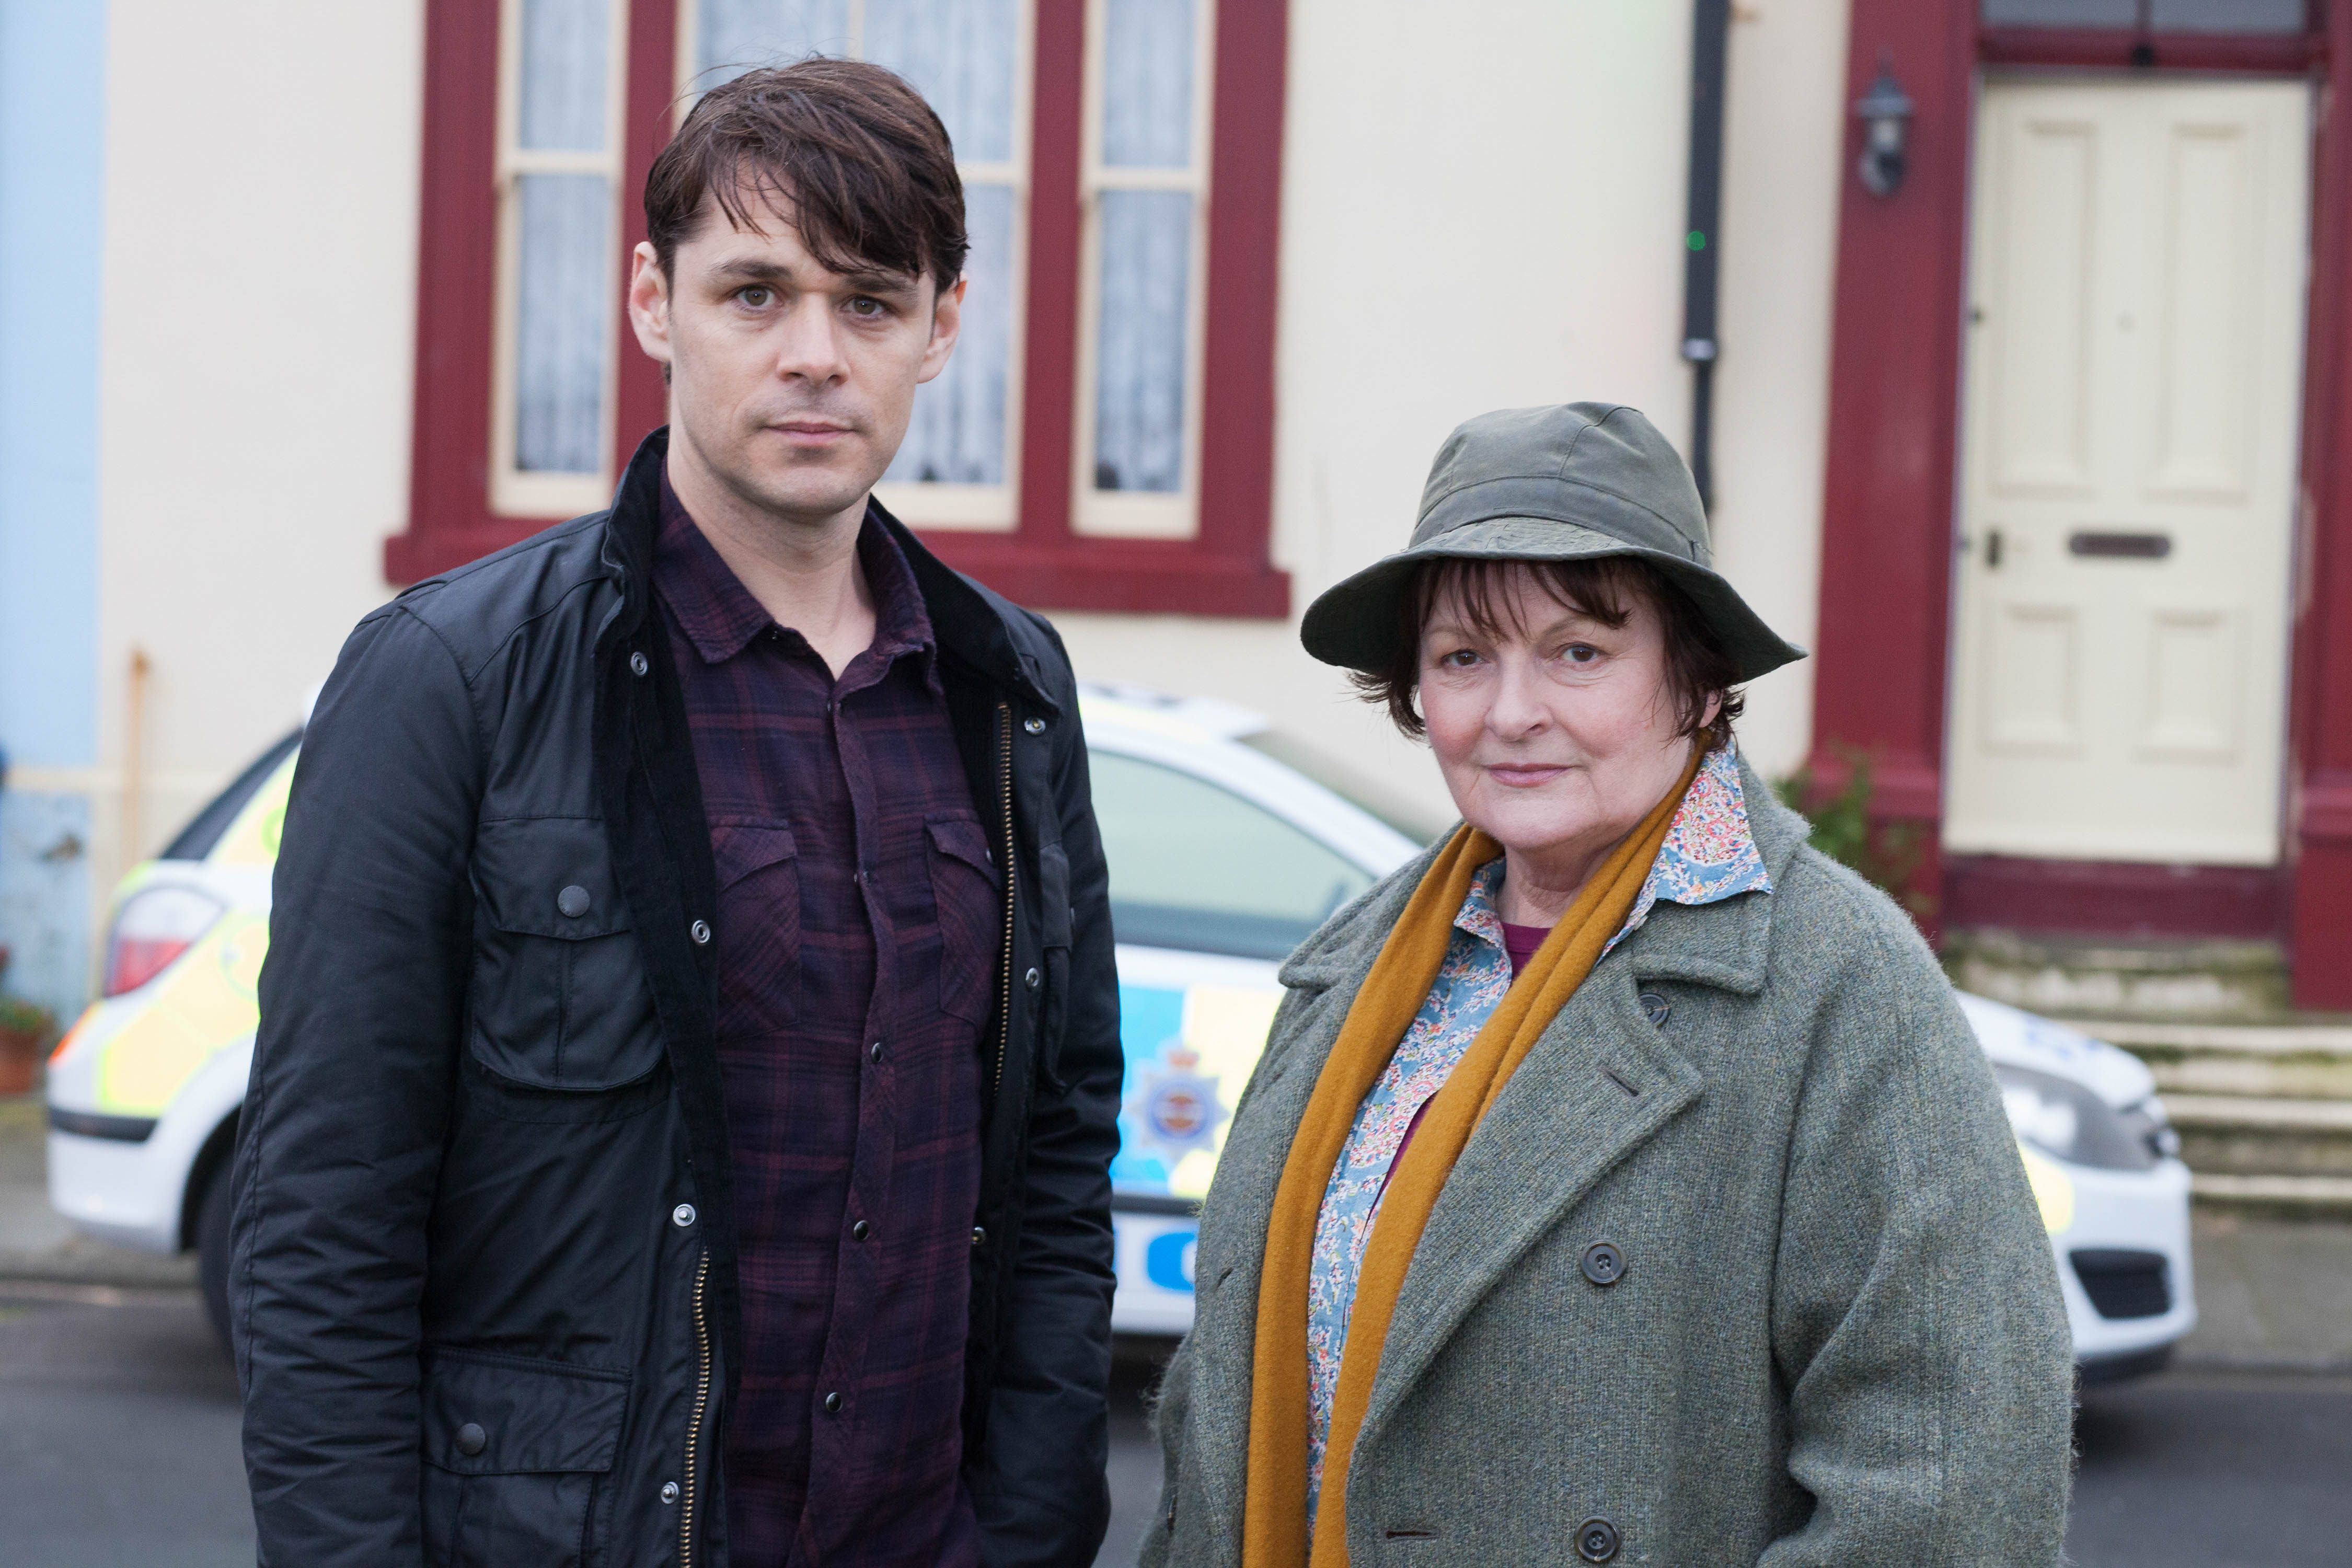 Brenda Blethyn and Kenny Doughty in "Vera" Series 5. (Photo: Acorn TV)